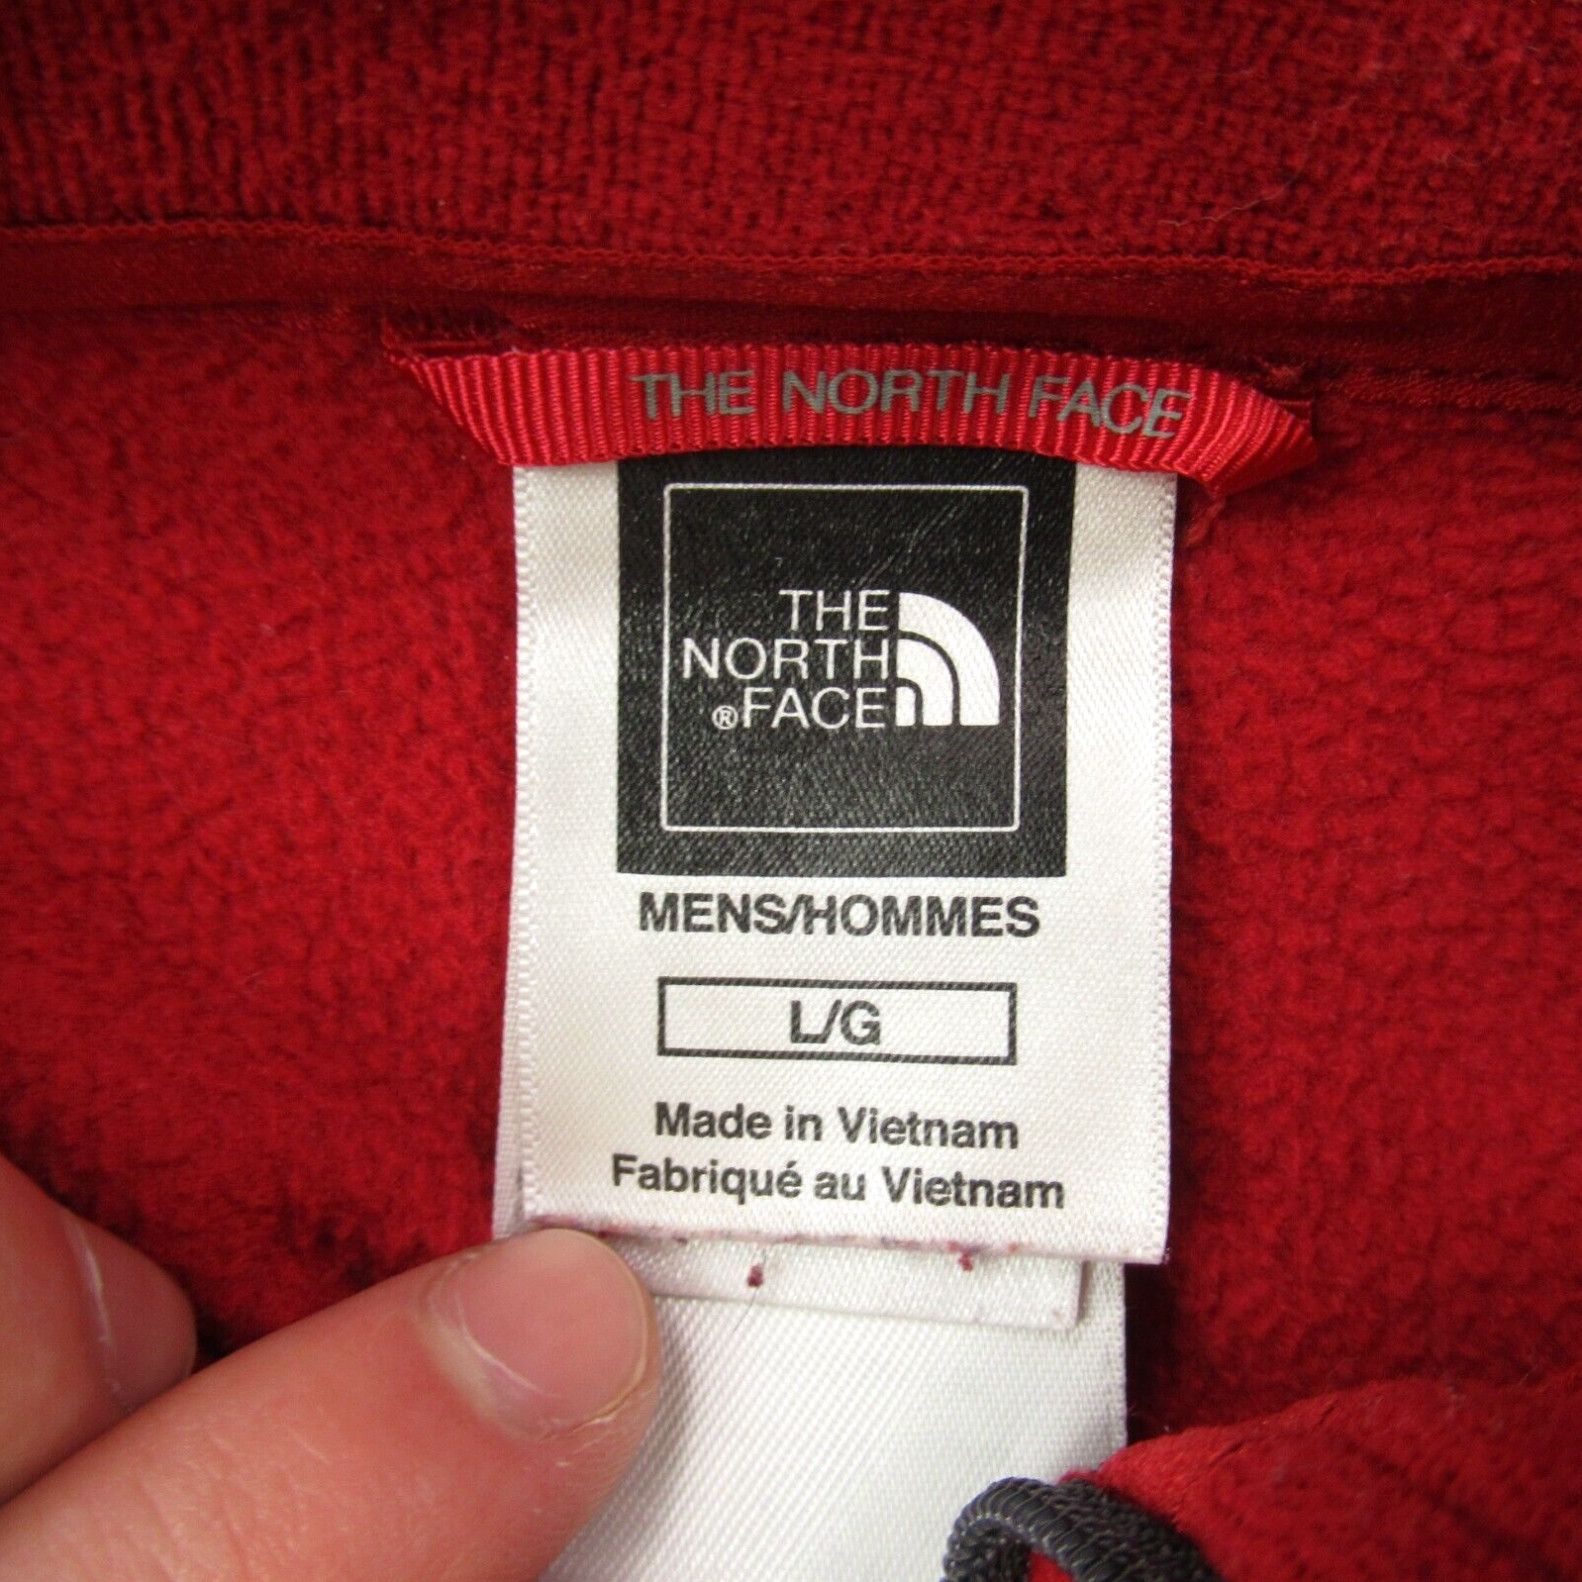 The North Face North Face Sweater Mens Large Long Sleeve 1/4 Zip Pullover Red Fleece Casual Size US L / EU 52-54 / 3 - 3 Thumbnail